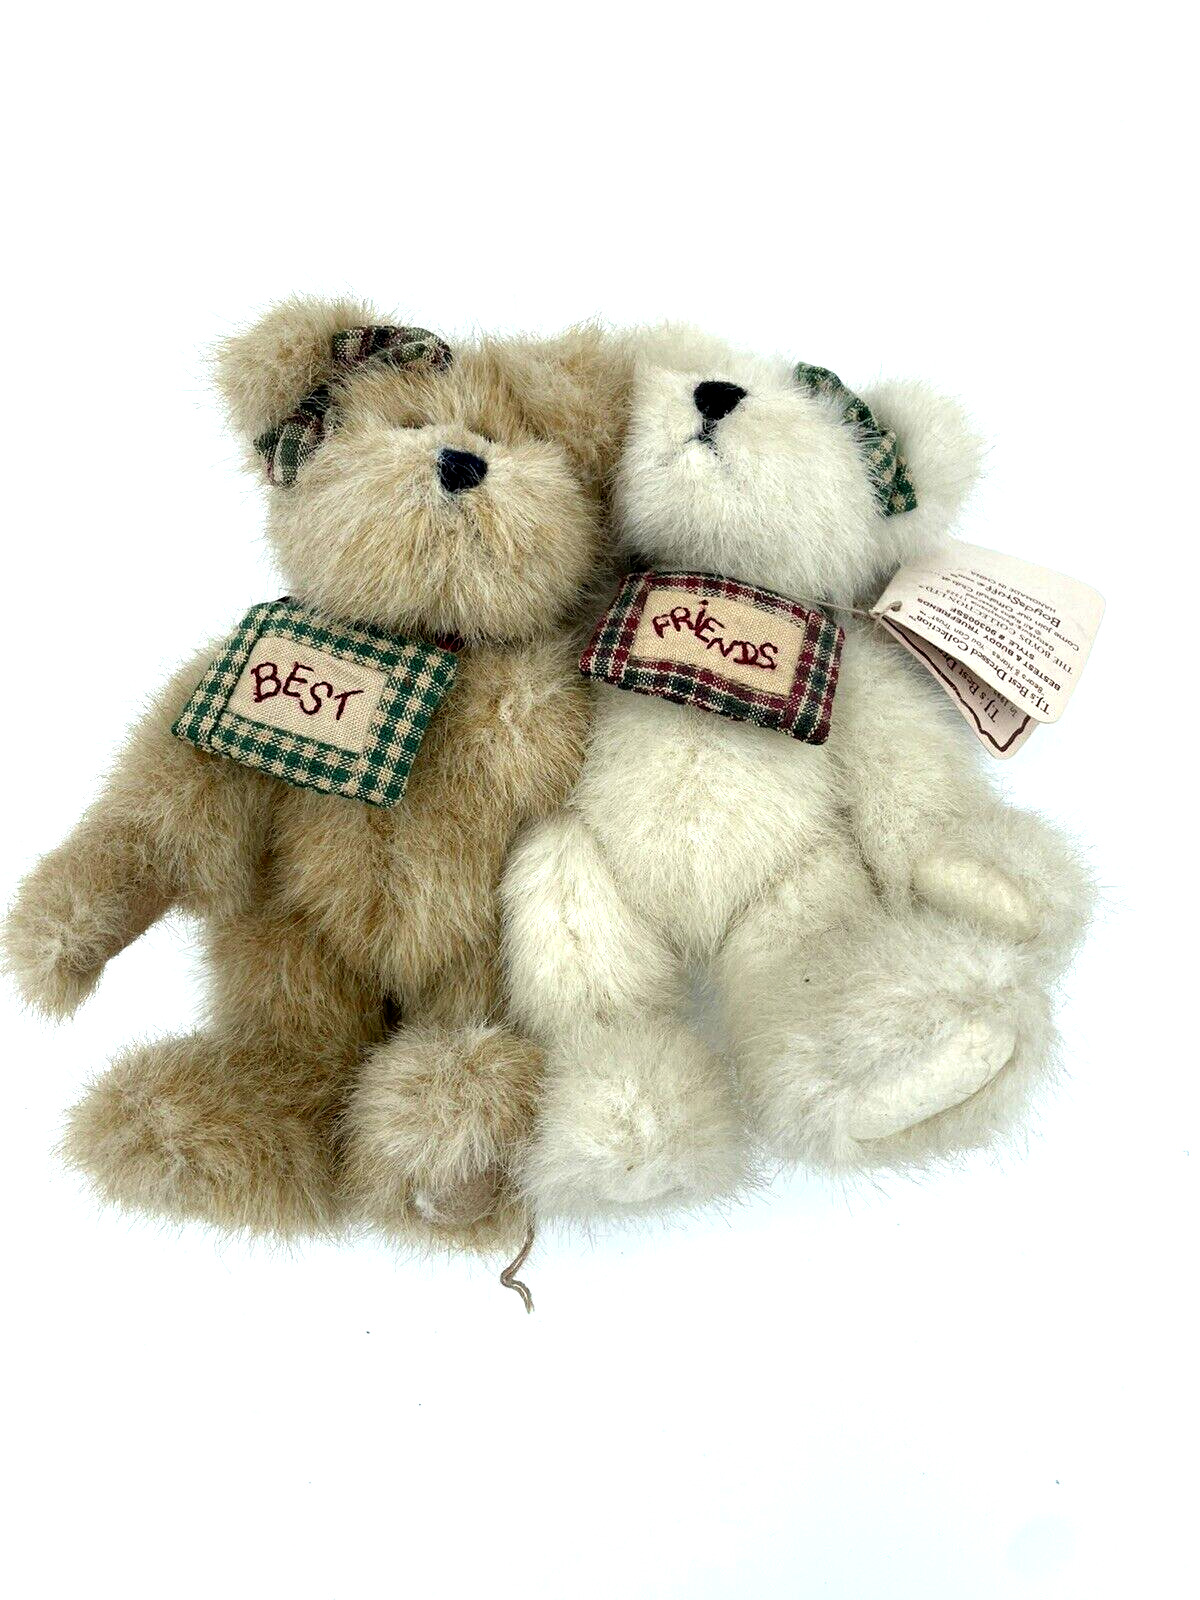 Boyds Bears Attached Best Friends Plush Teddy Bears W/Tags